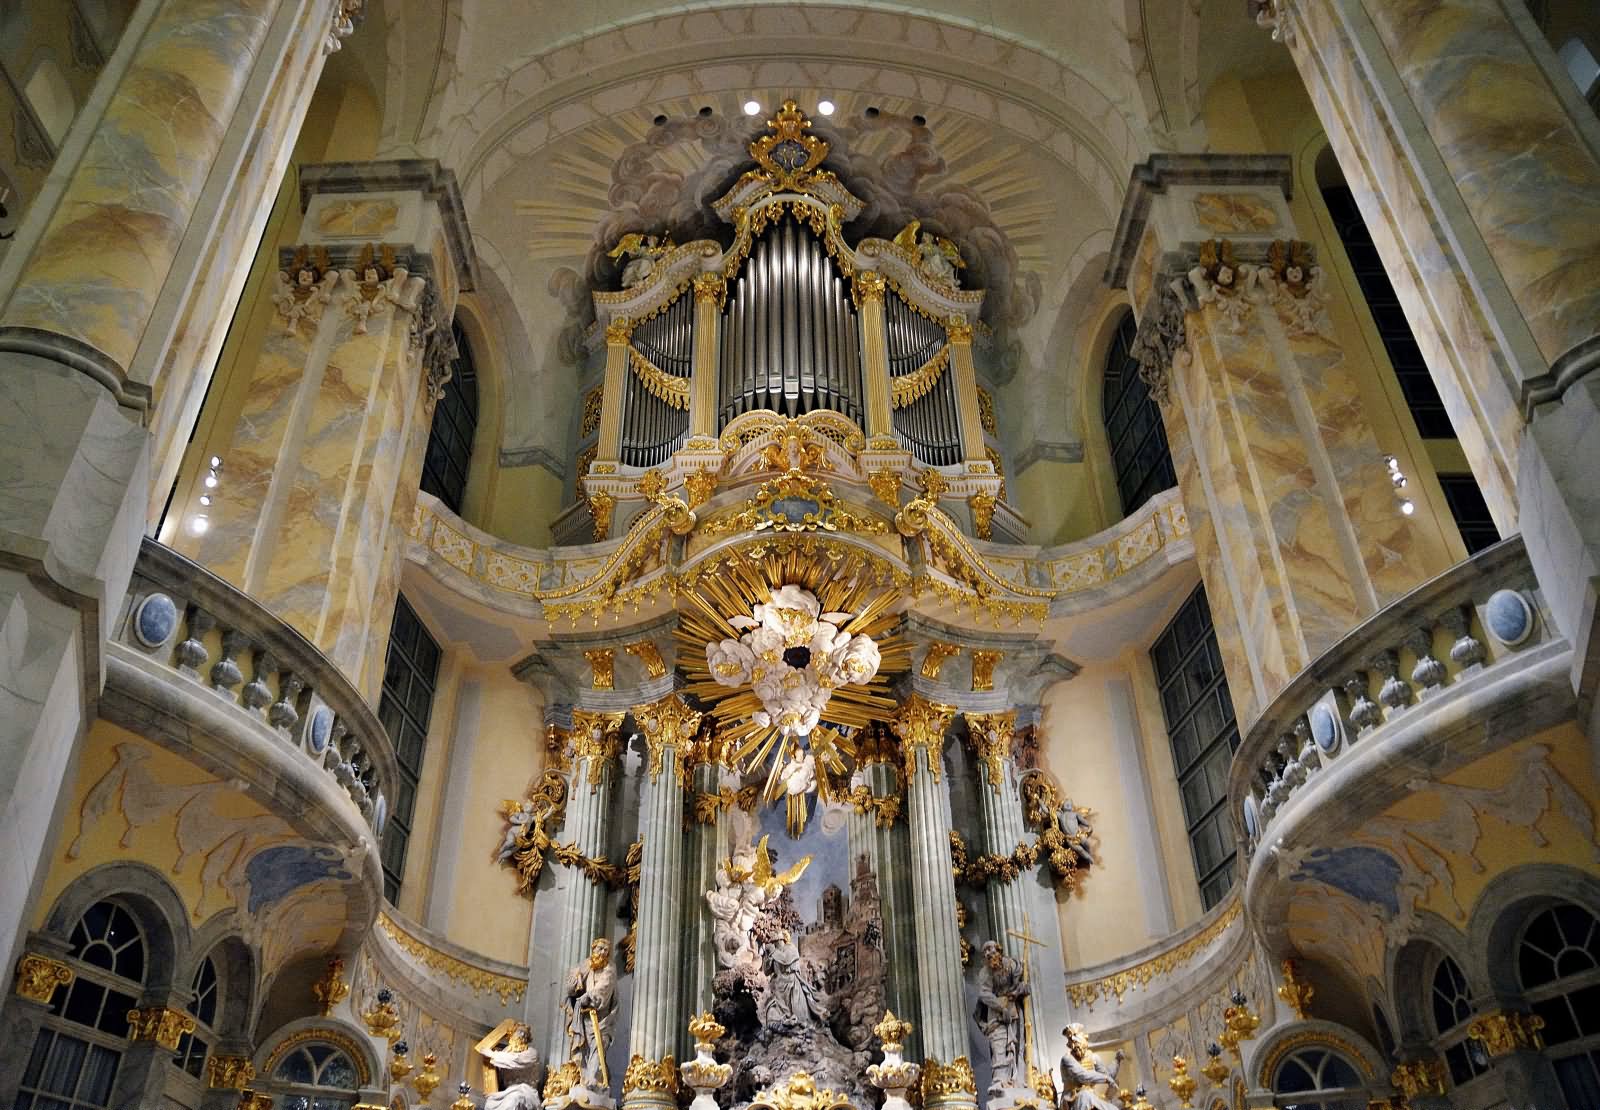 25 Adorable Inside View Images Of The Frauenkirche Dresden In Germany